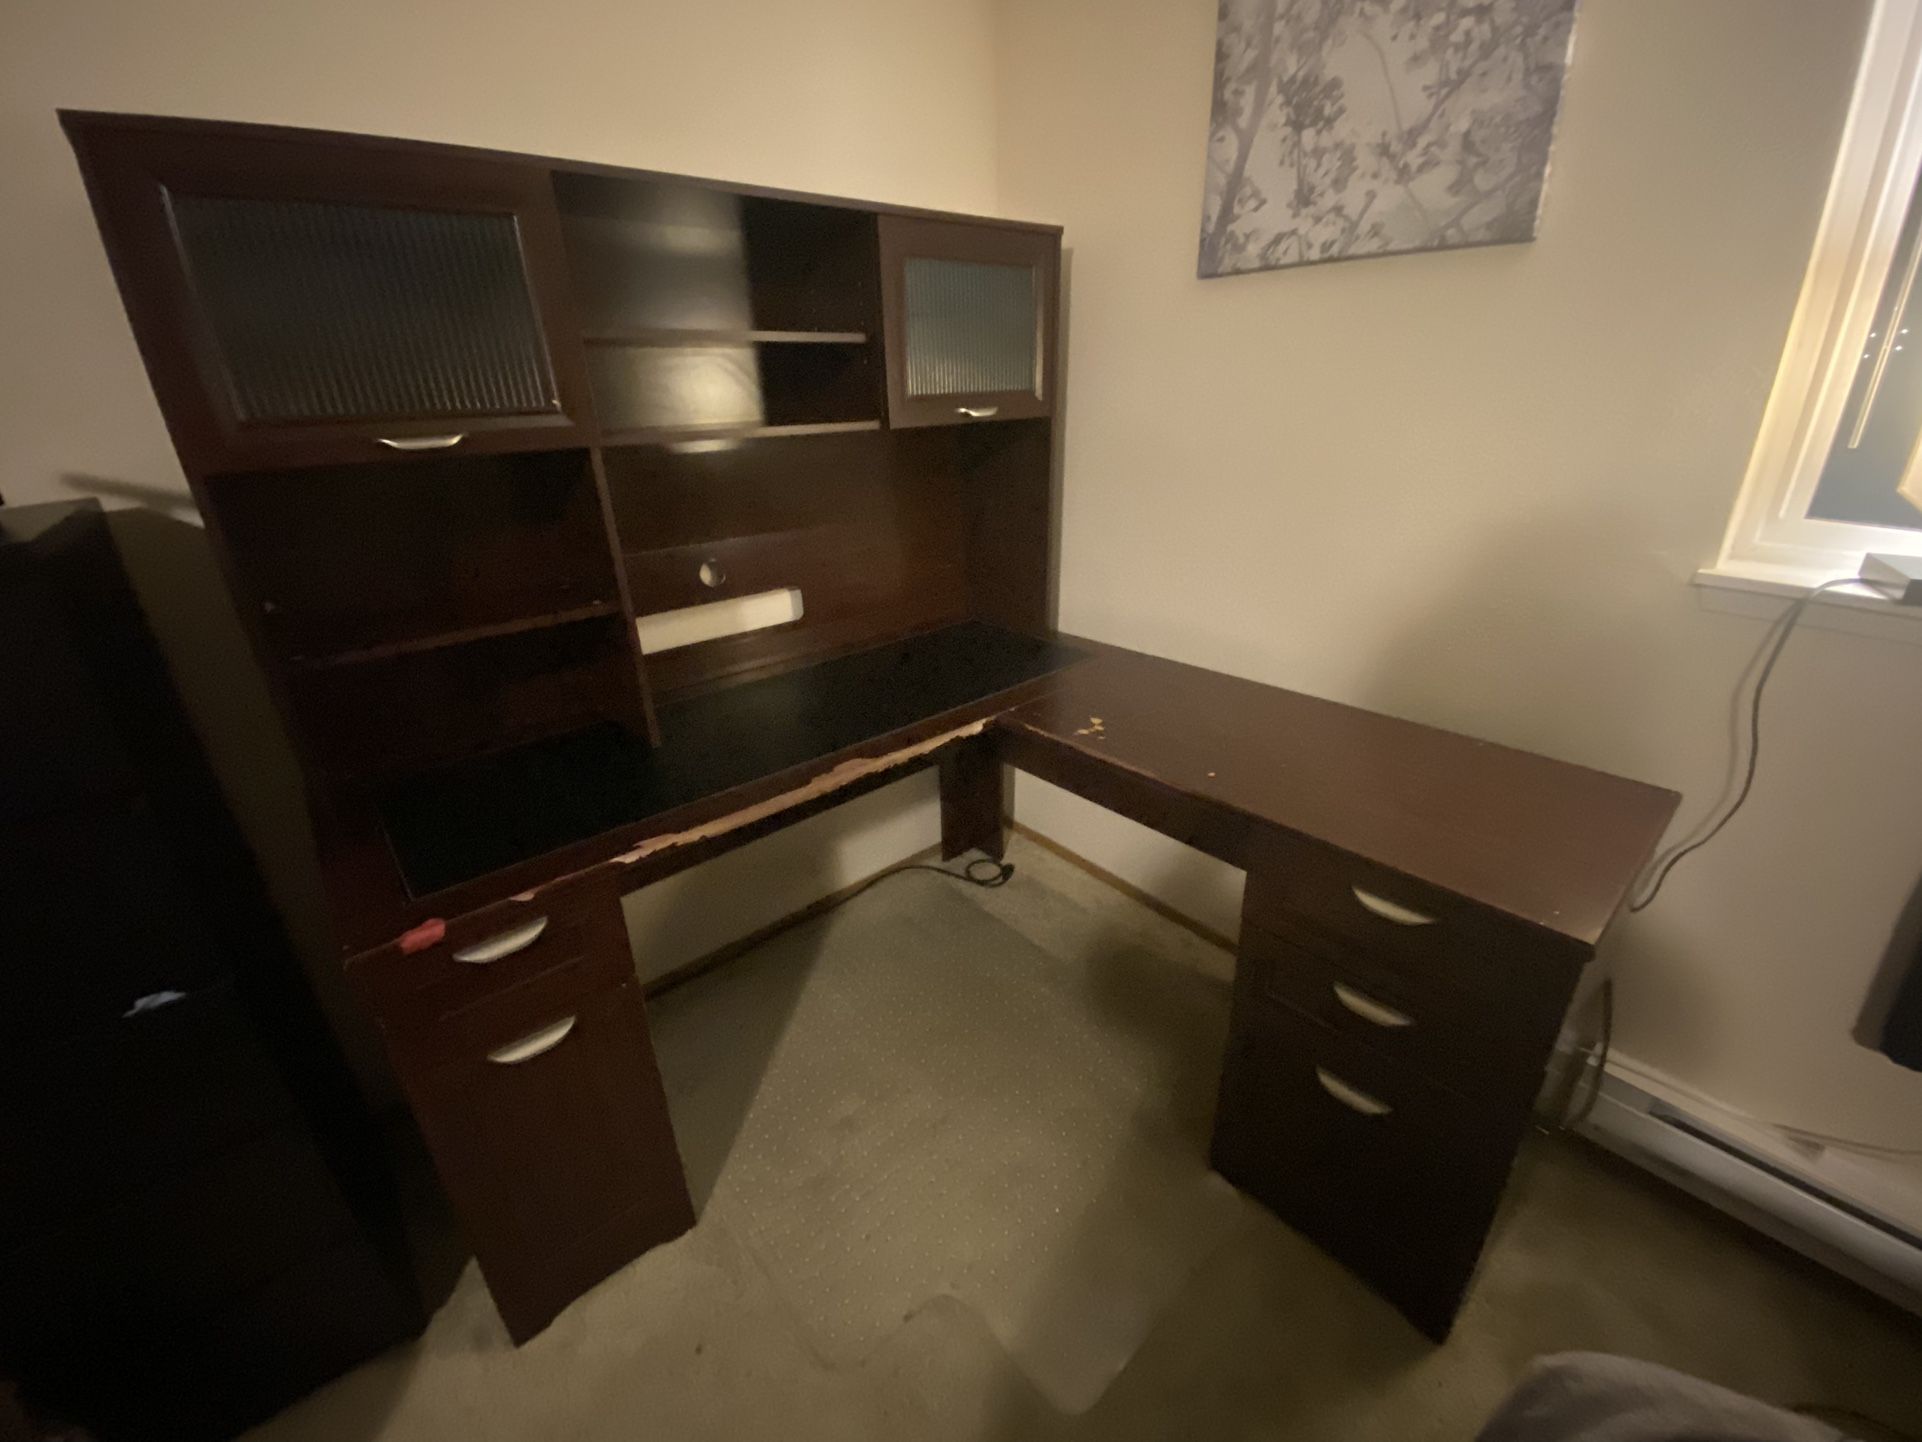 Large L-shaped desk with plenty of storage space